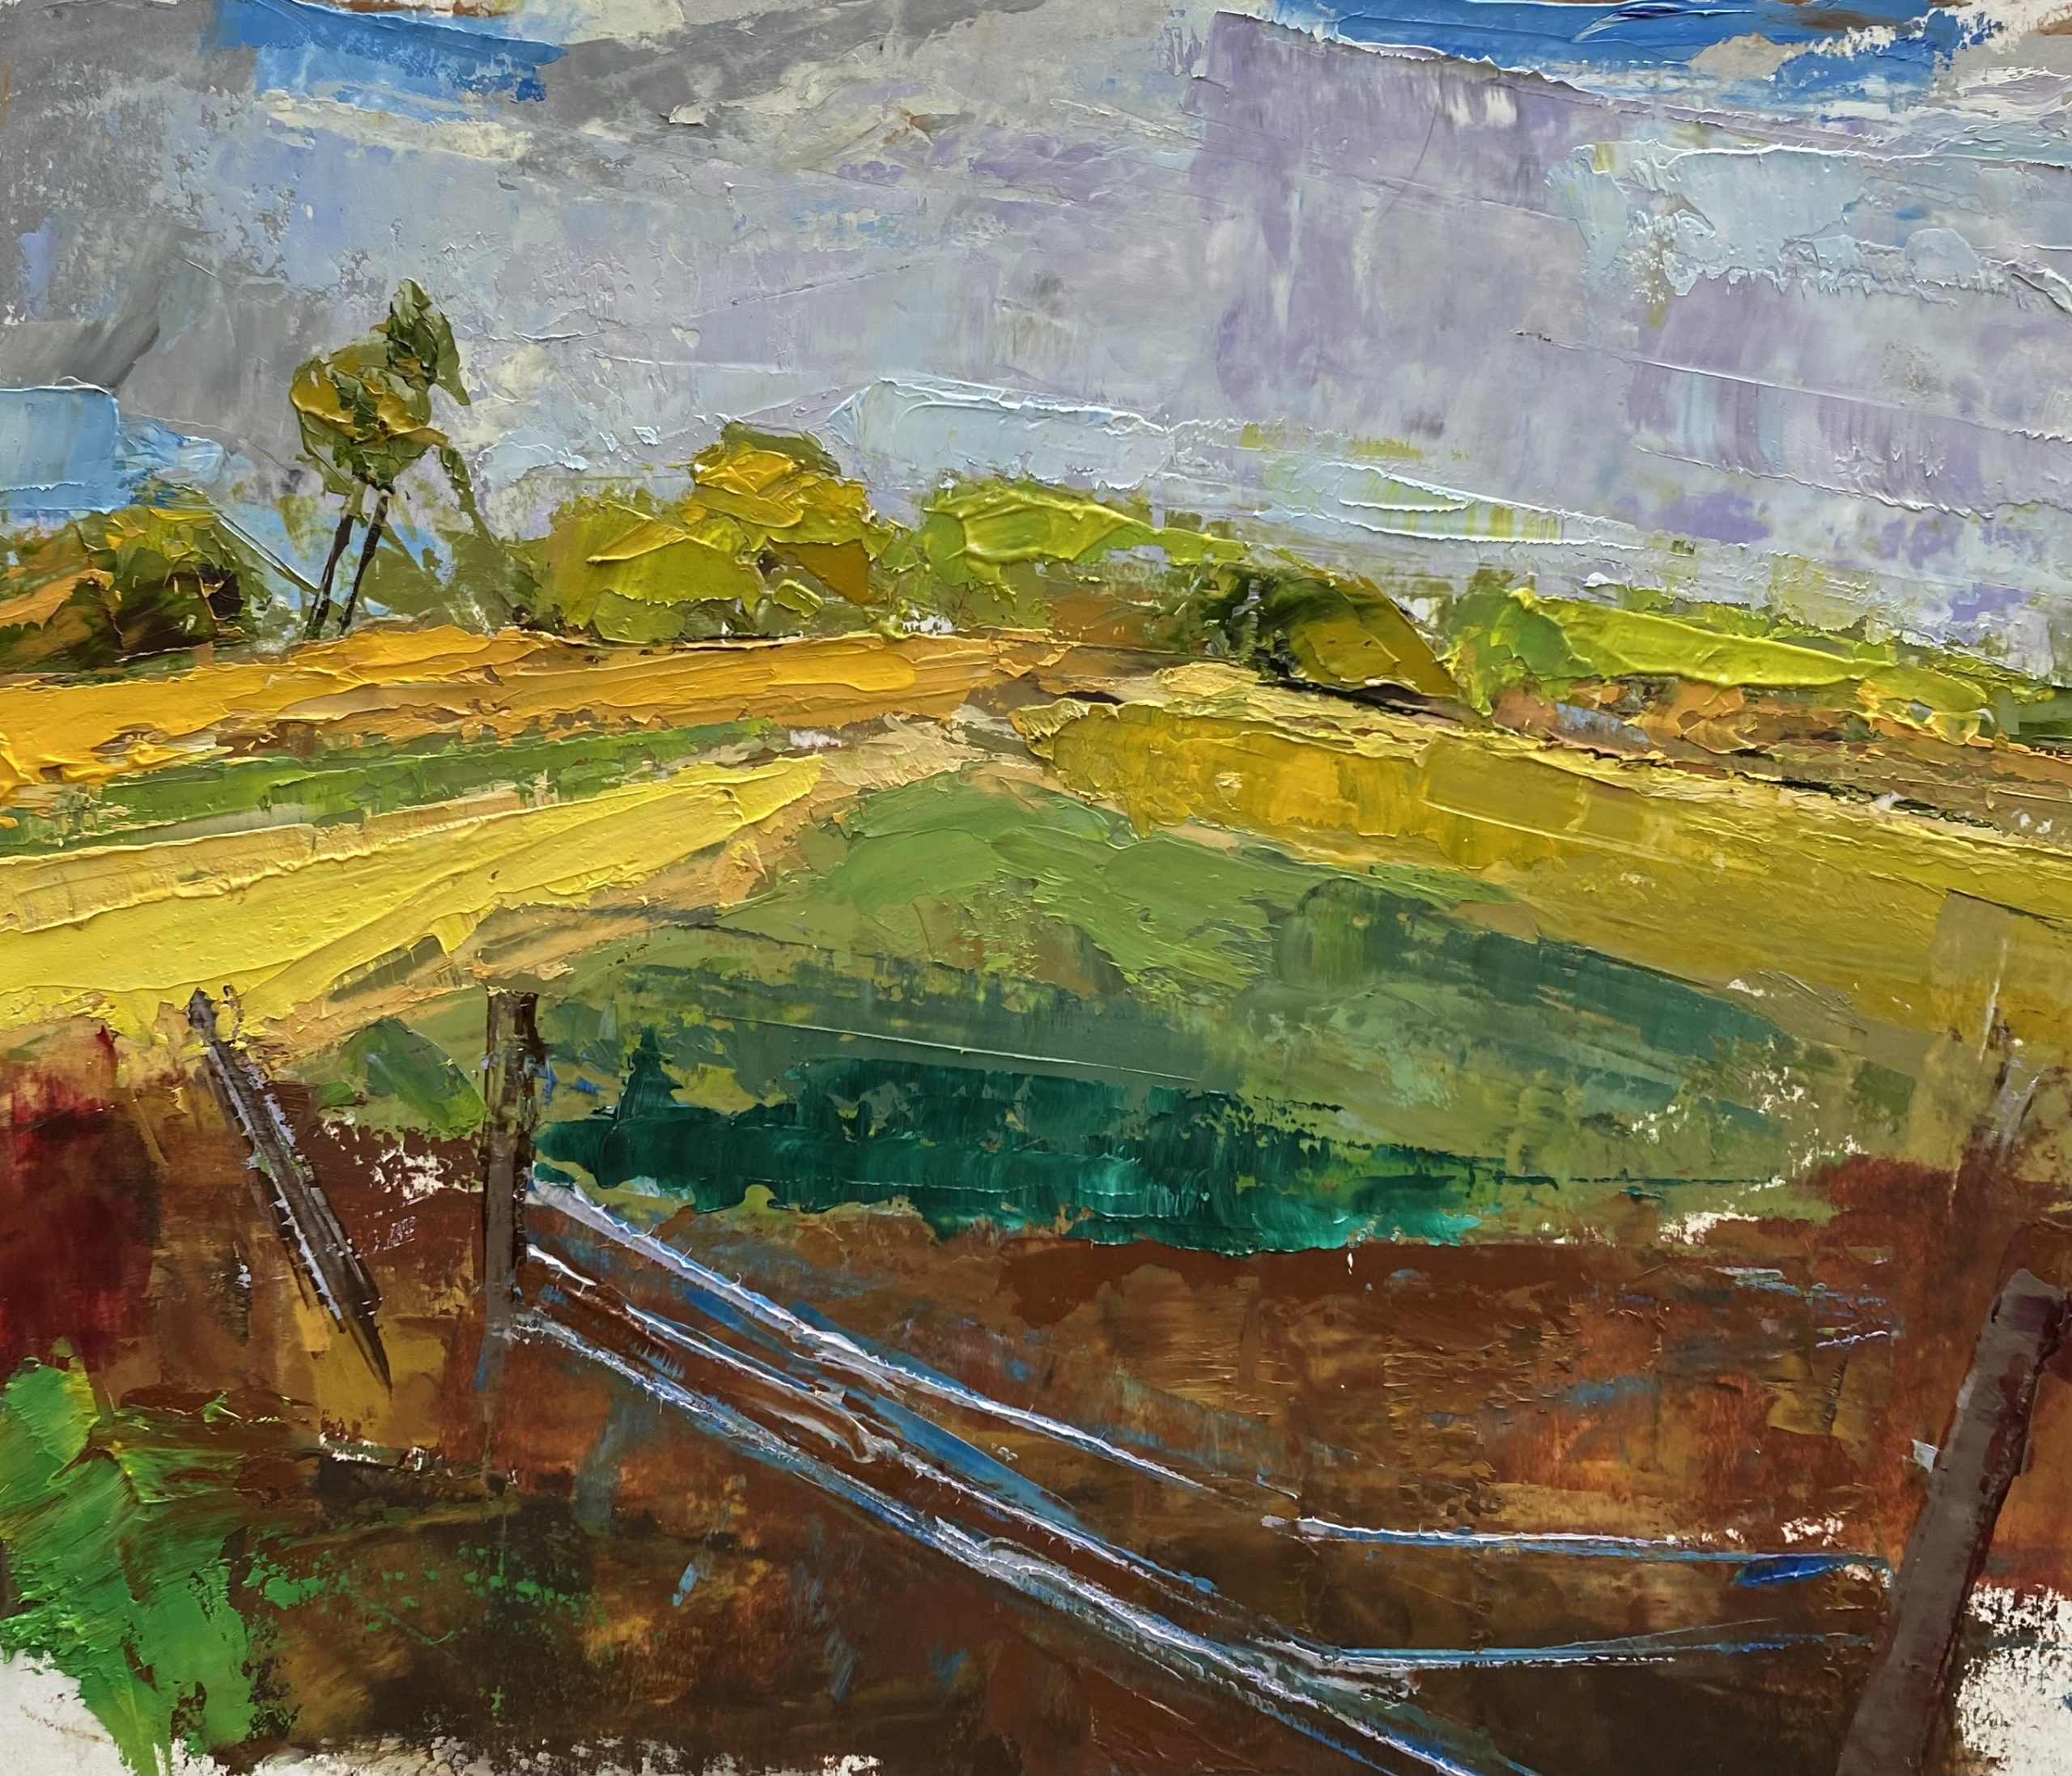 After the Storm (oil on paper) by artist Kathleen Gefell